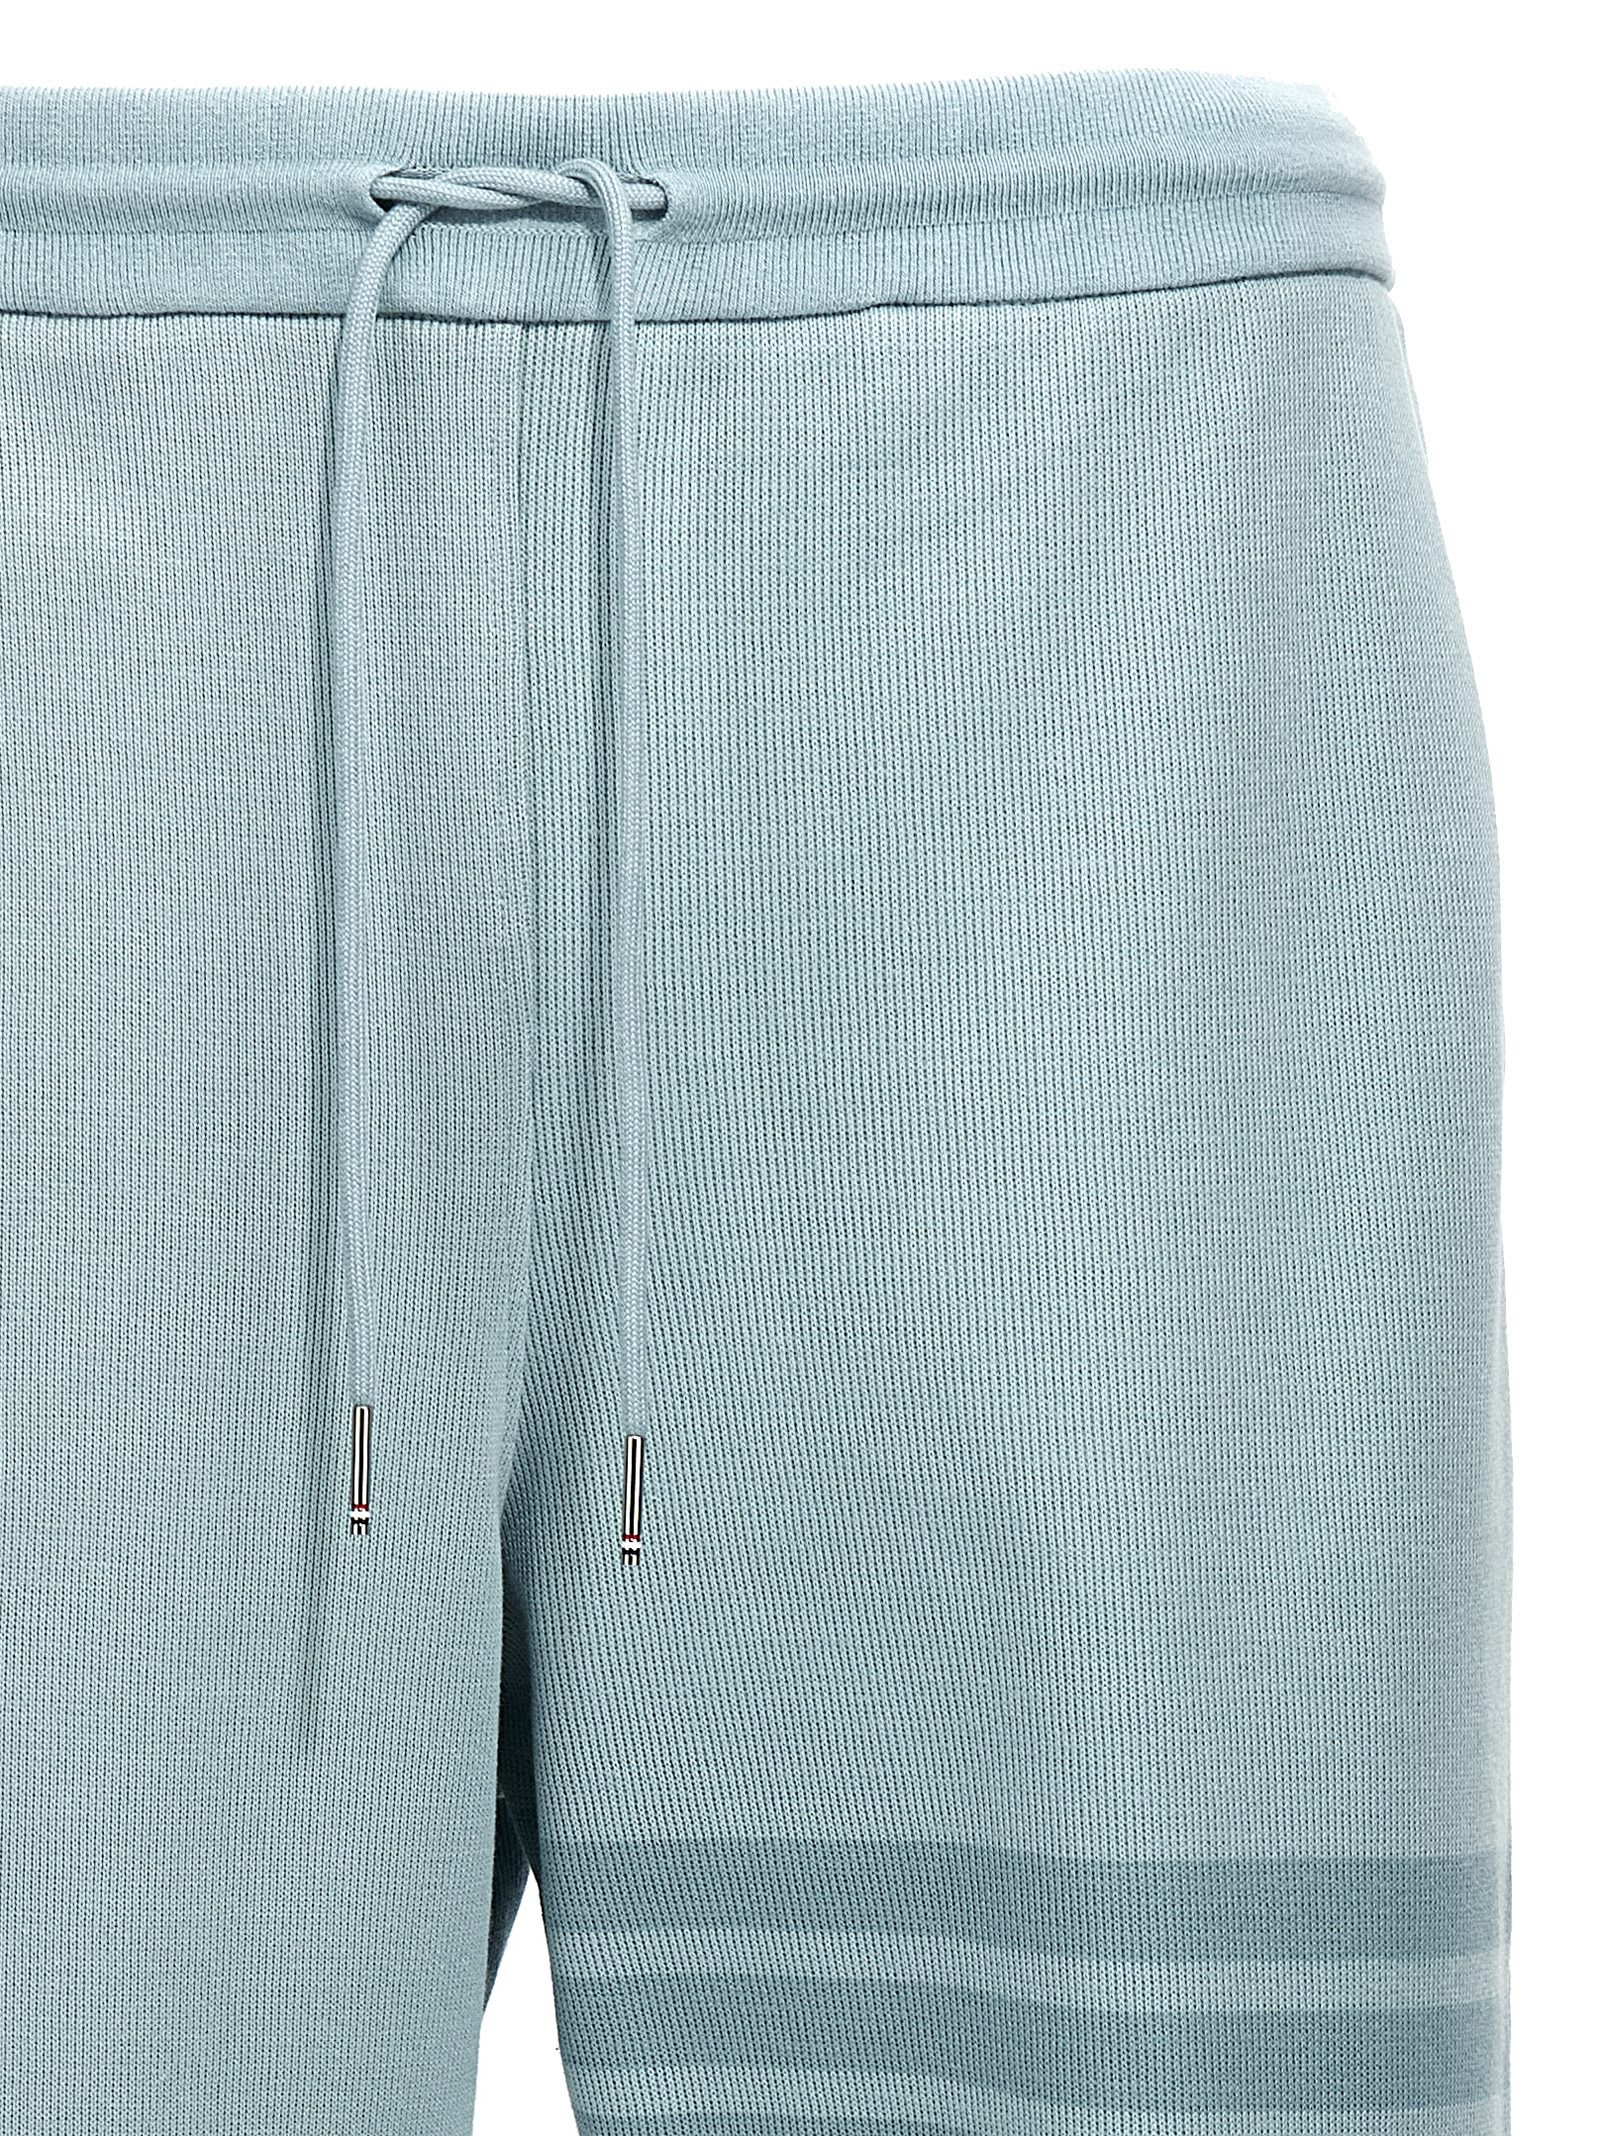 Shop Thom Browne 4 Bar Joggers In Light Blue